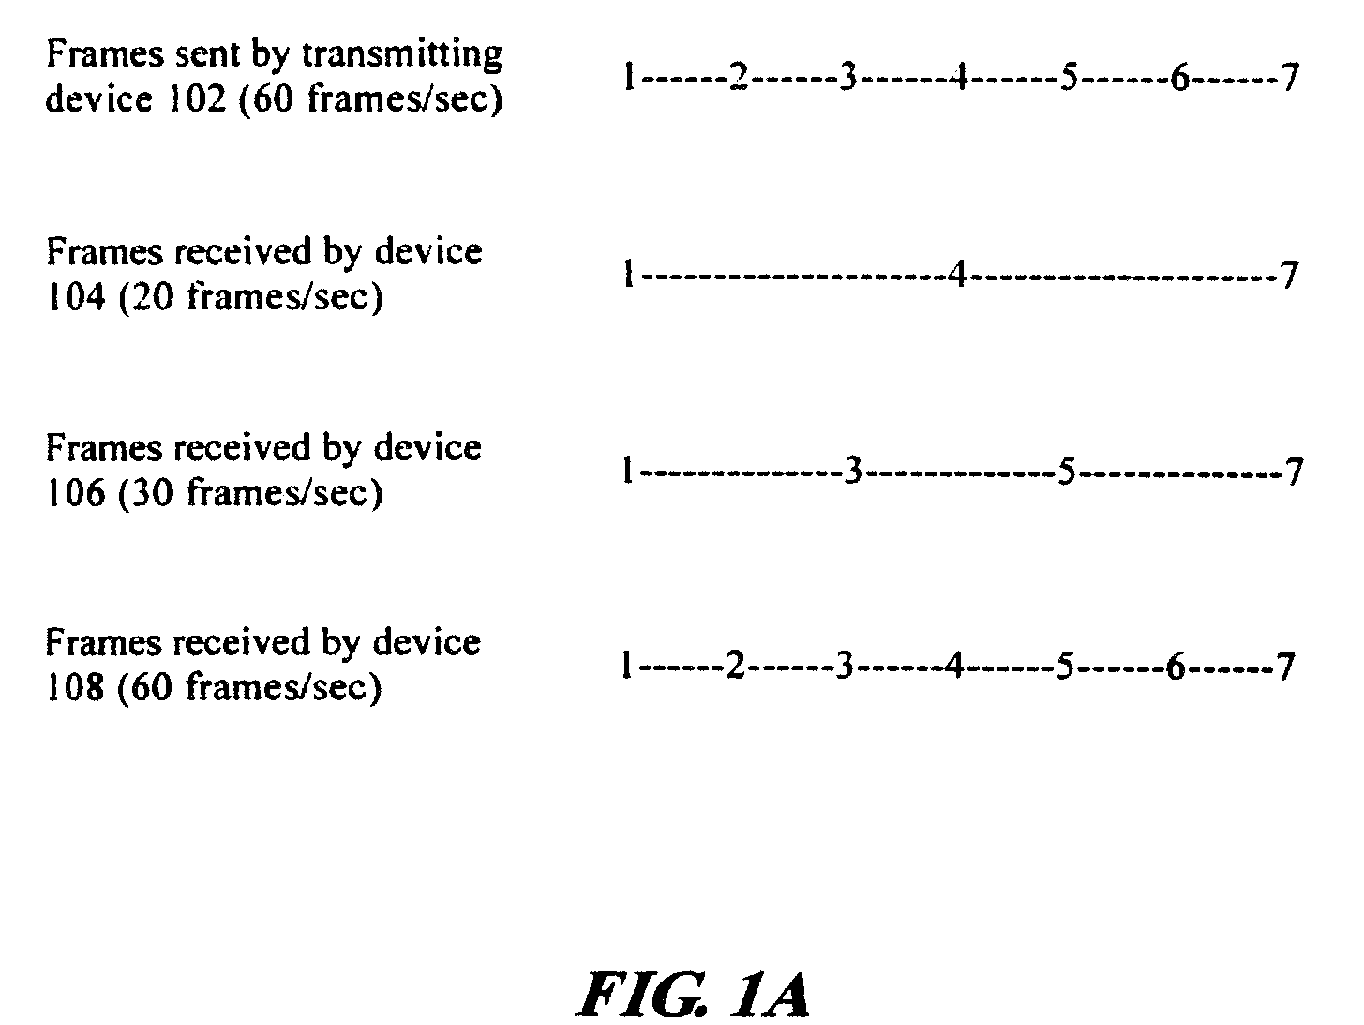 Method and System for Sharing One or More Graphics Images Between Devices Using Profiles